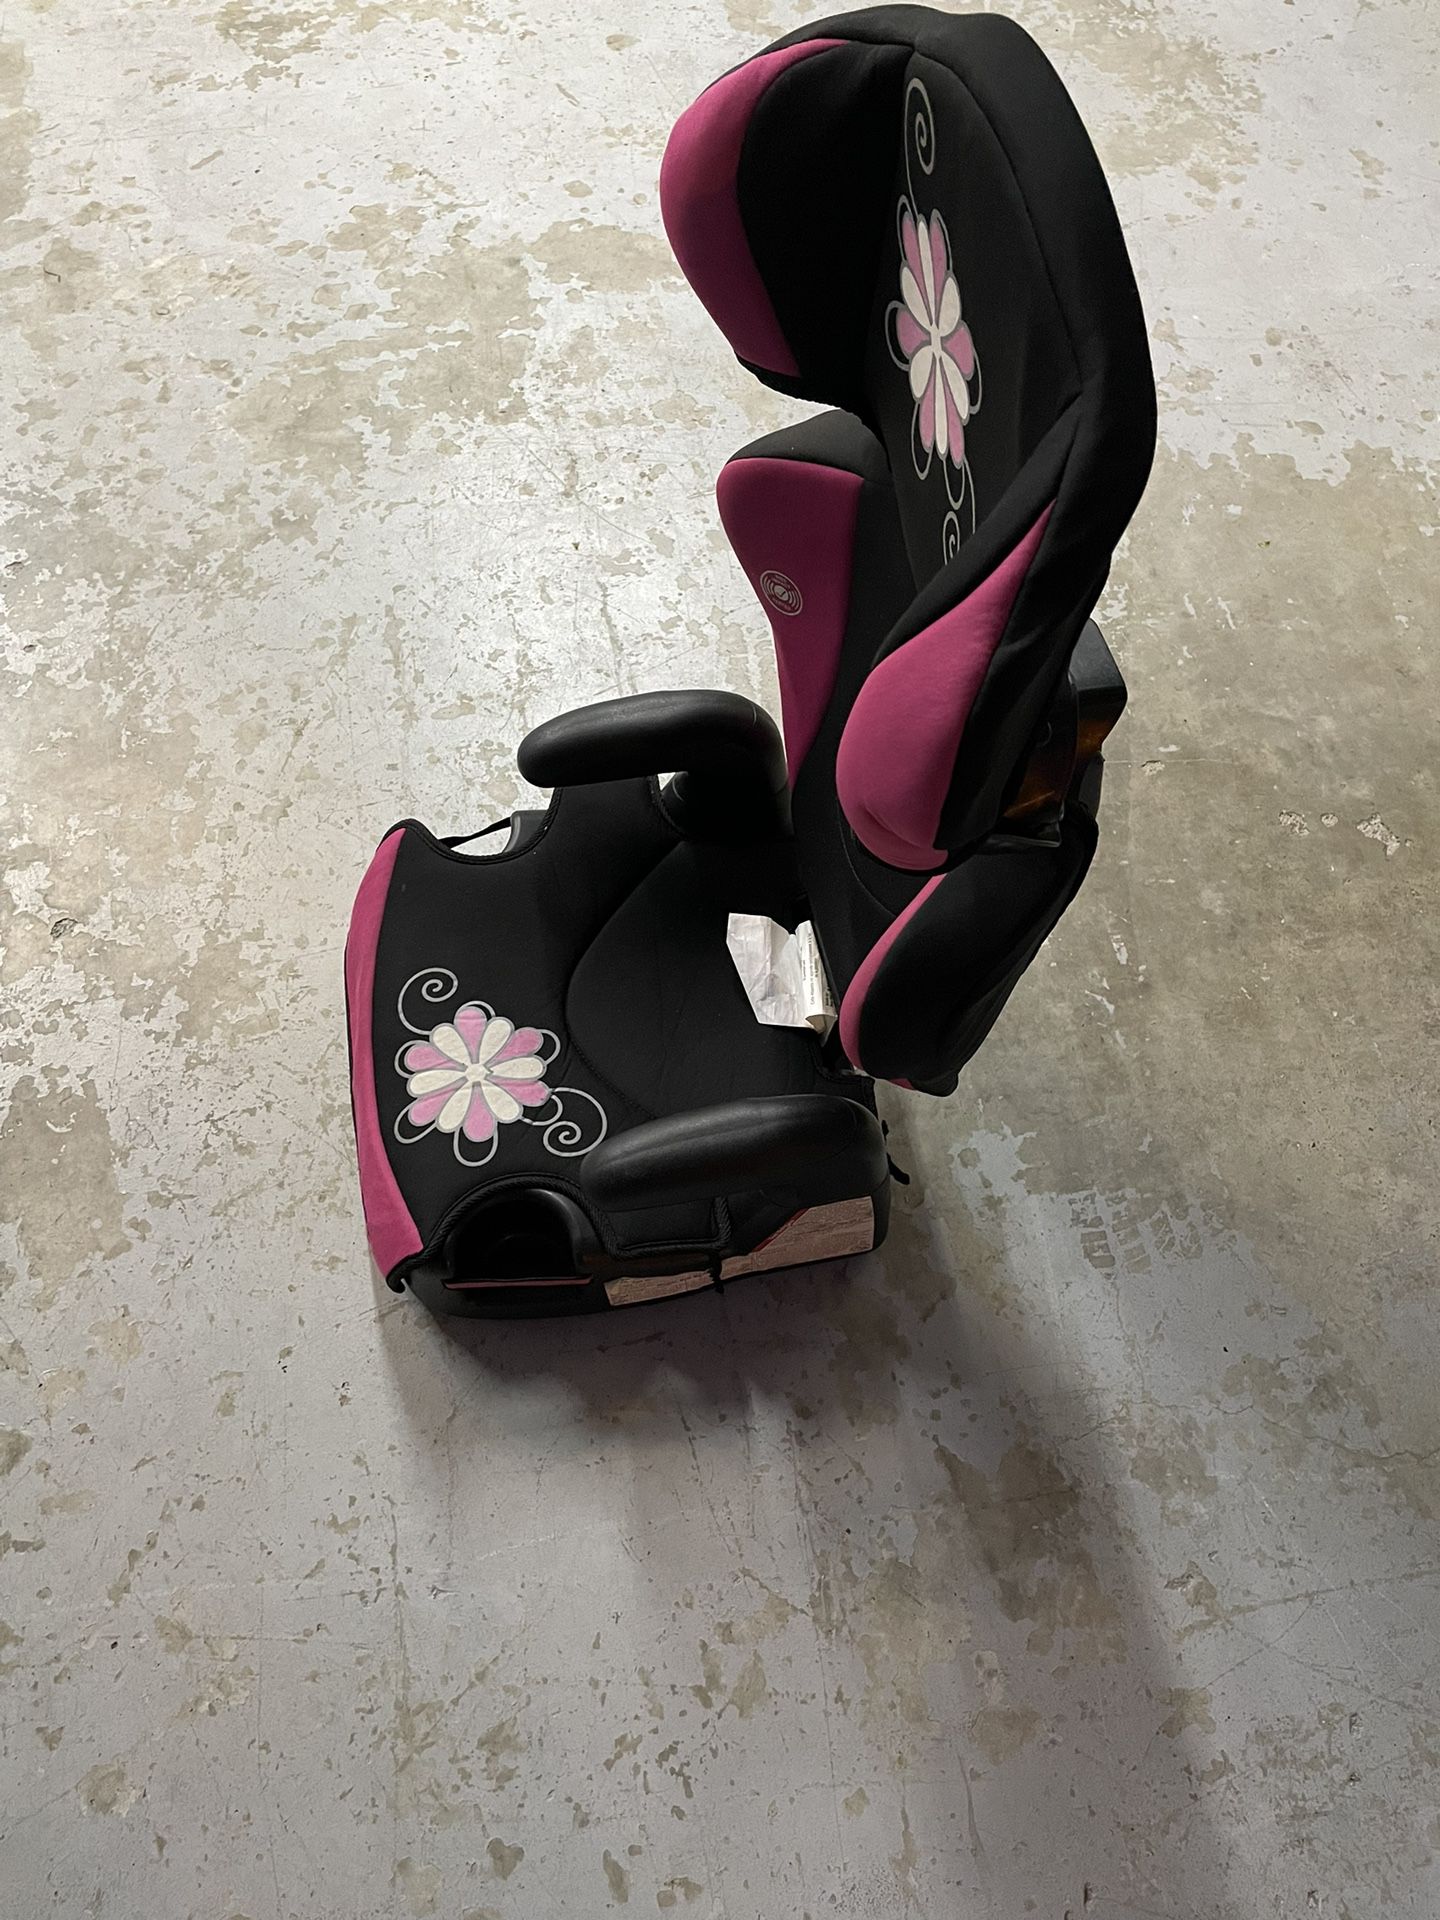 Child Booster Seat $8.00